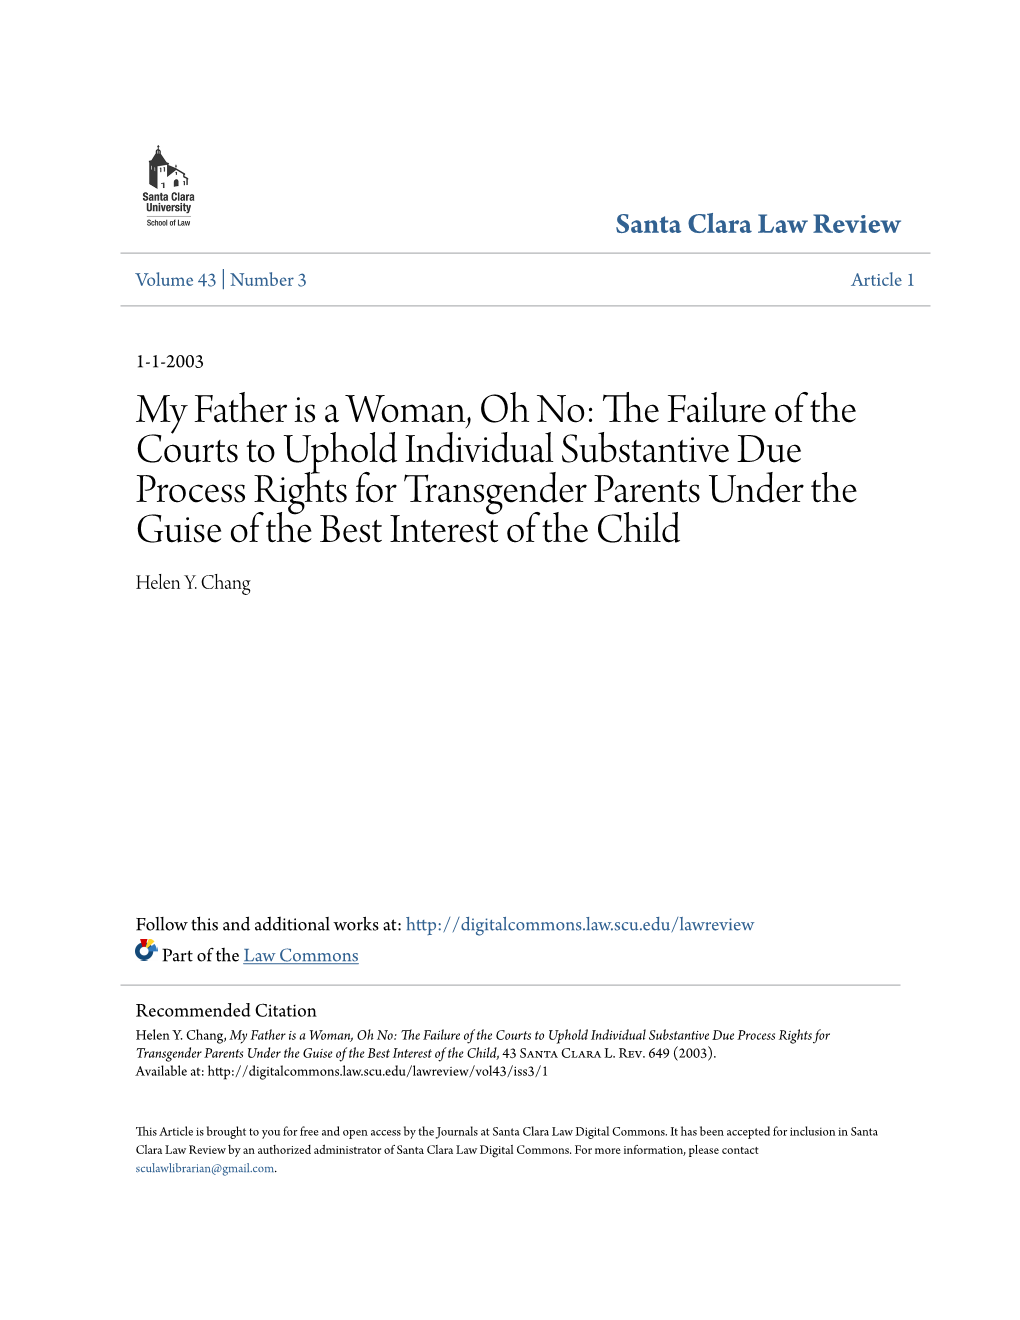 My Father Is a Woman, Oh No: the Failure of the Courts to Uphold